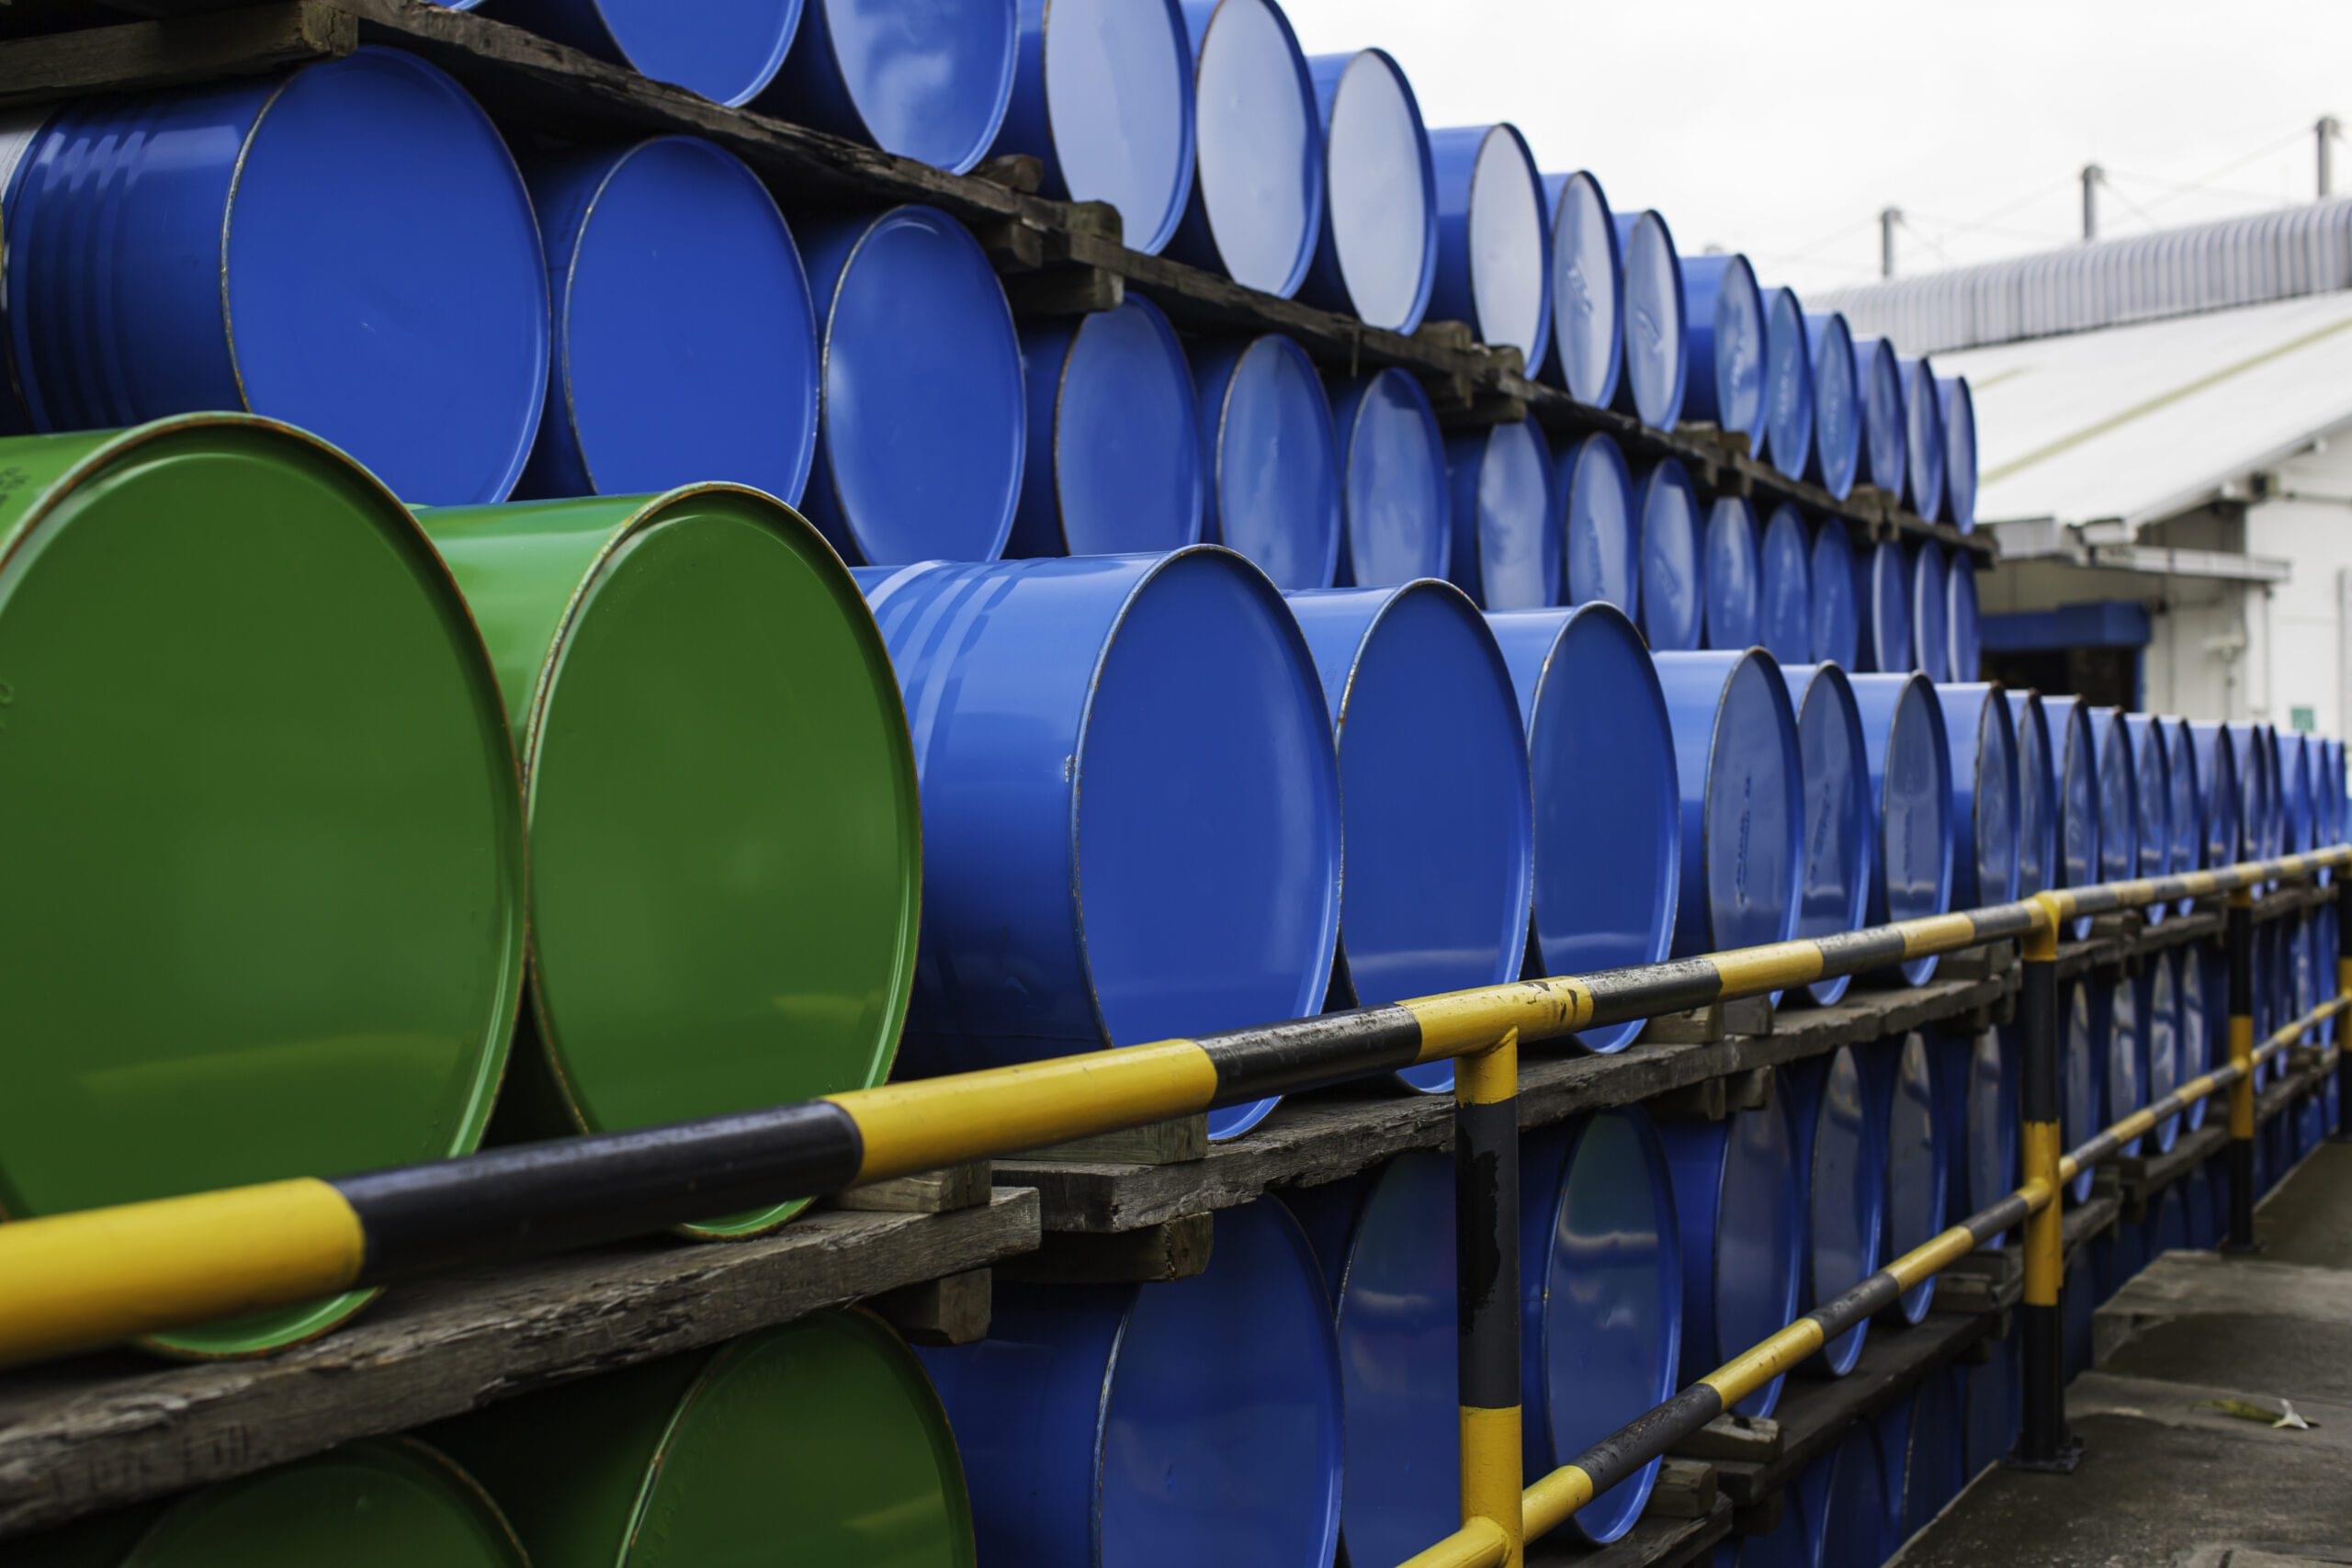 Oil barrels blue and green or chemical drums horizontal